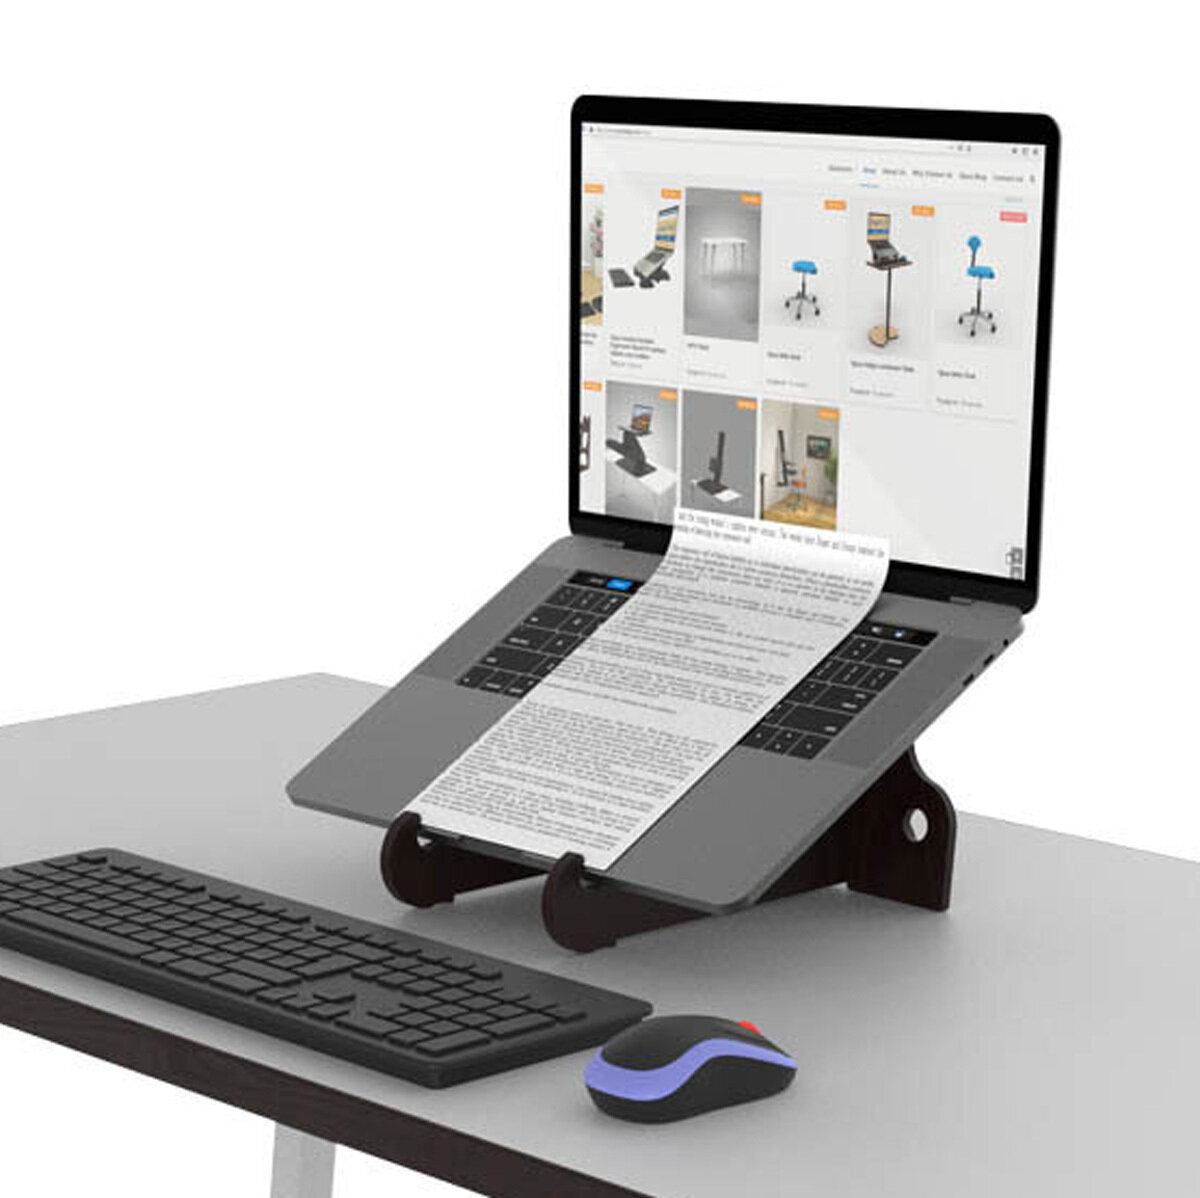 AriseGo: Portable ergonomic stand for laptops, tablets, and smartphones